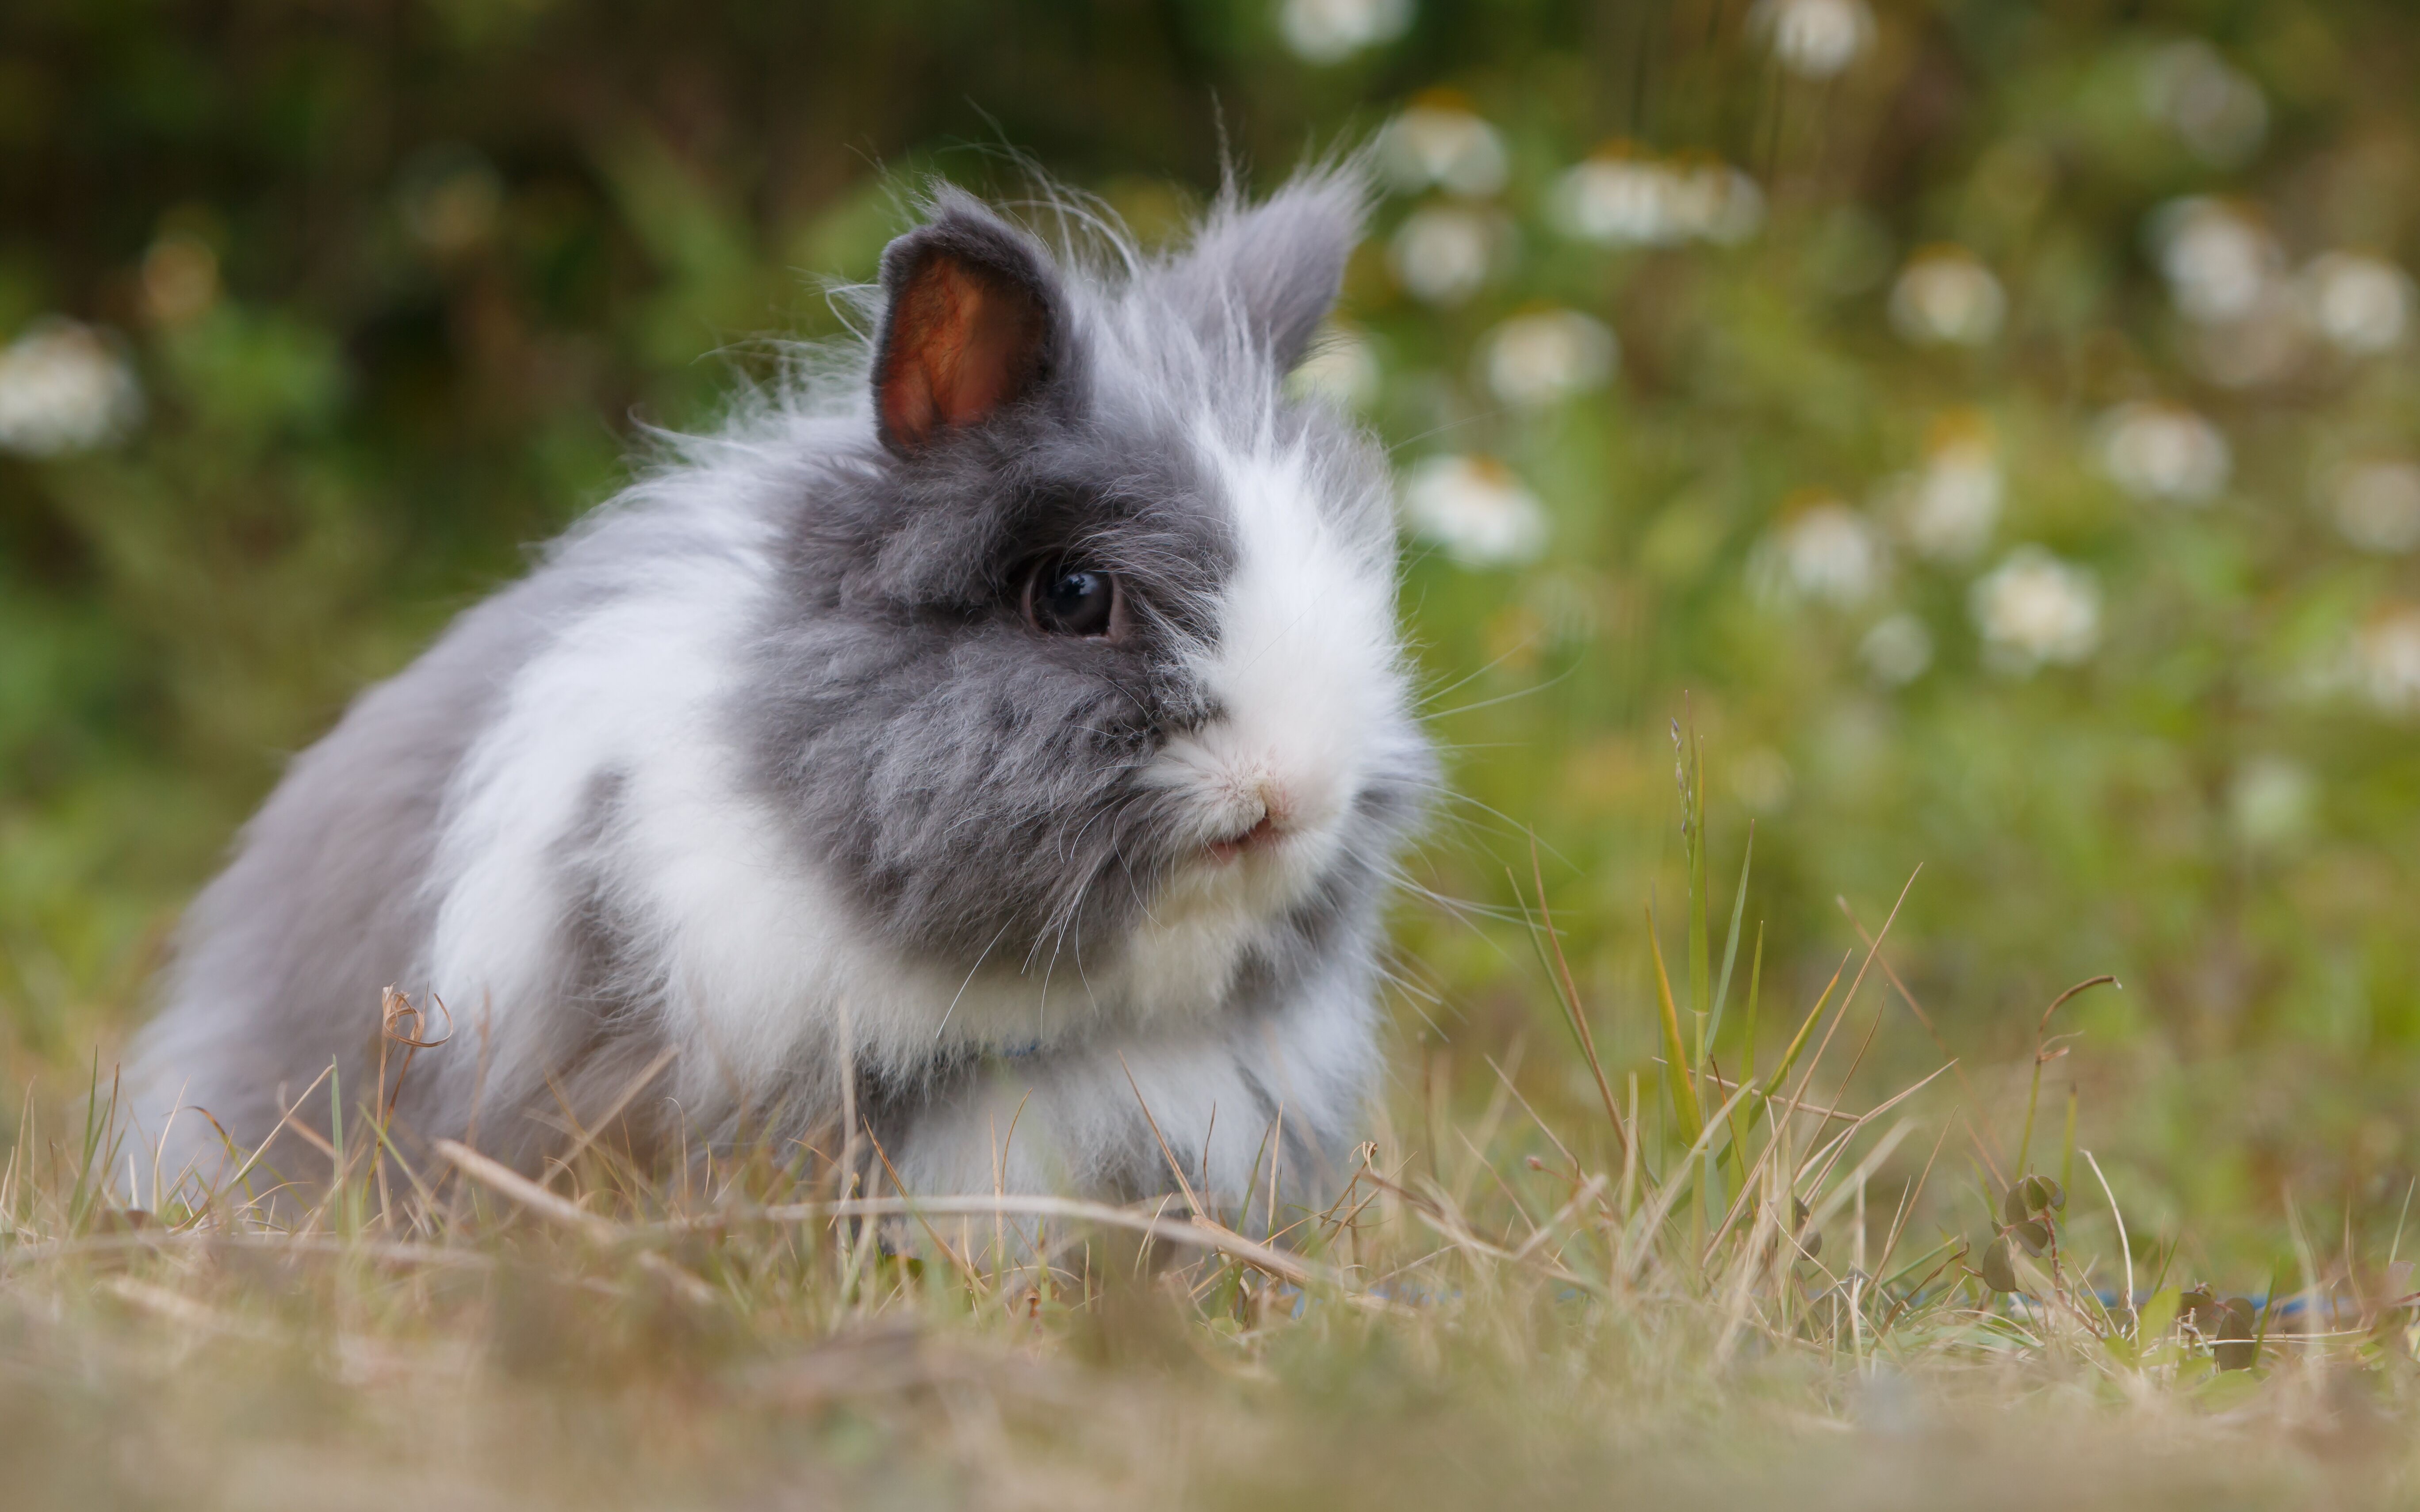 EXPERTS WARNING NOT TO FEED RABBITS LETTUCE